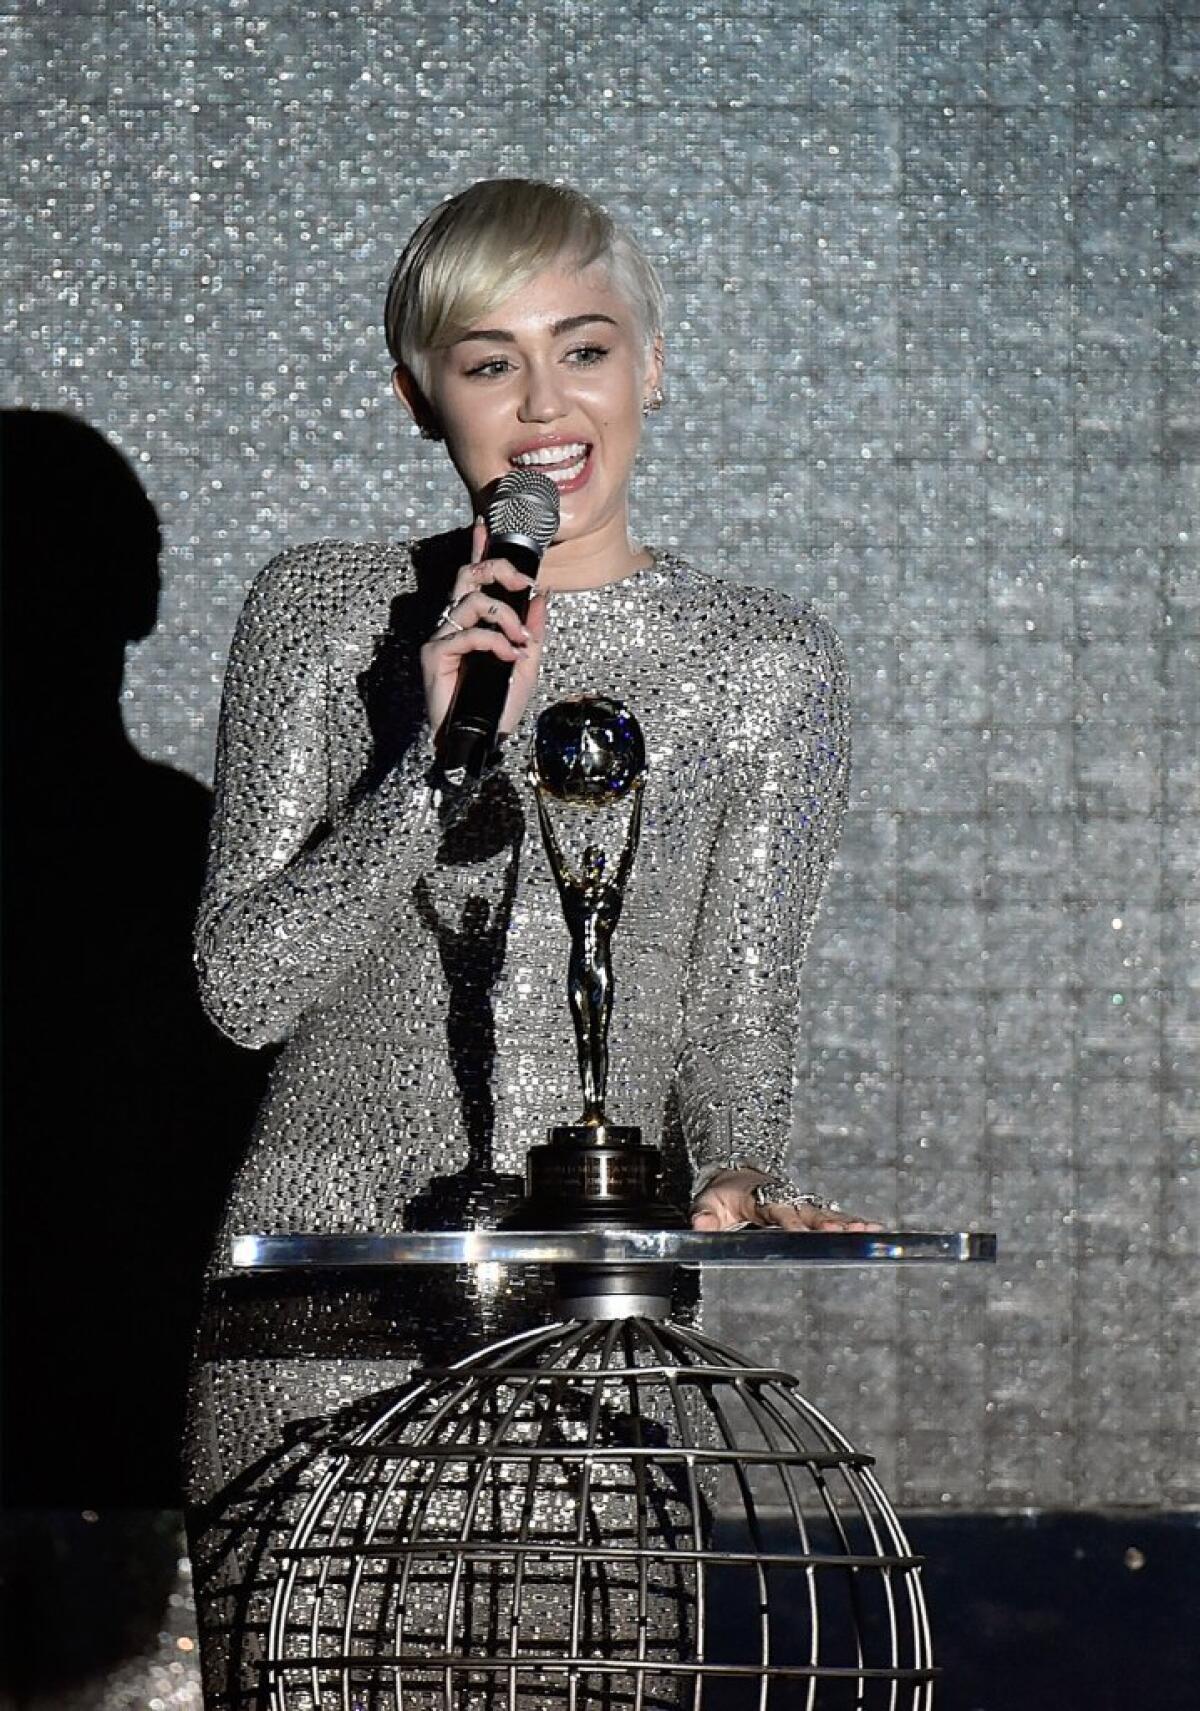 Miley Cyrus receives an award during the ceremony of the 2014 World Music Awards in Monte Carlo, Monaco.